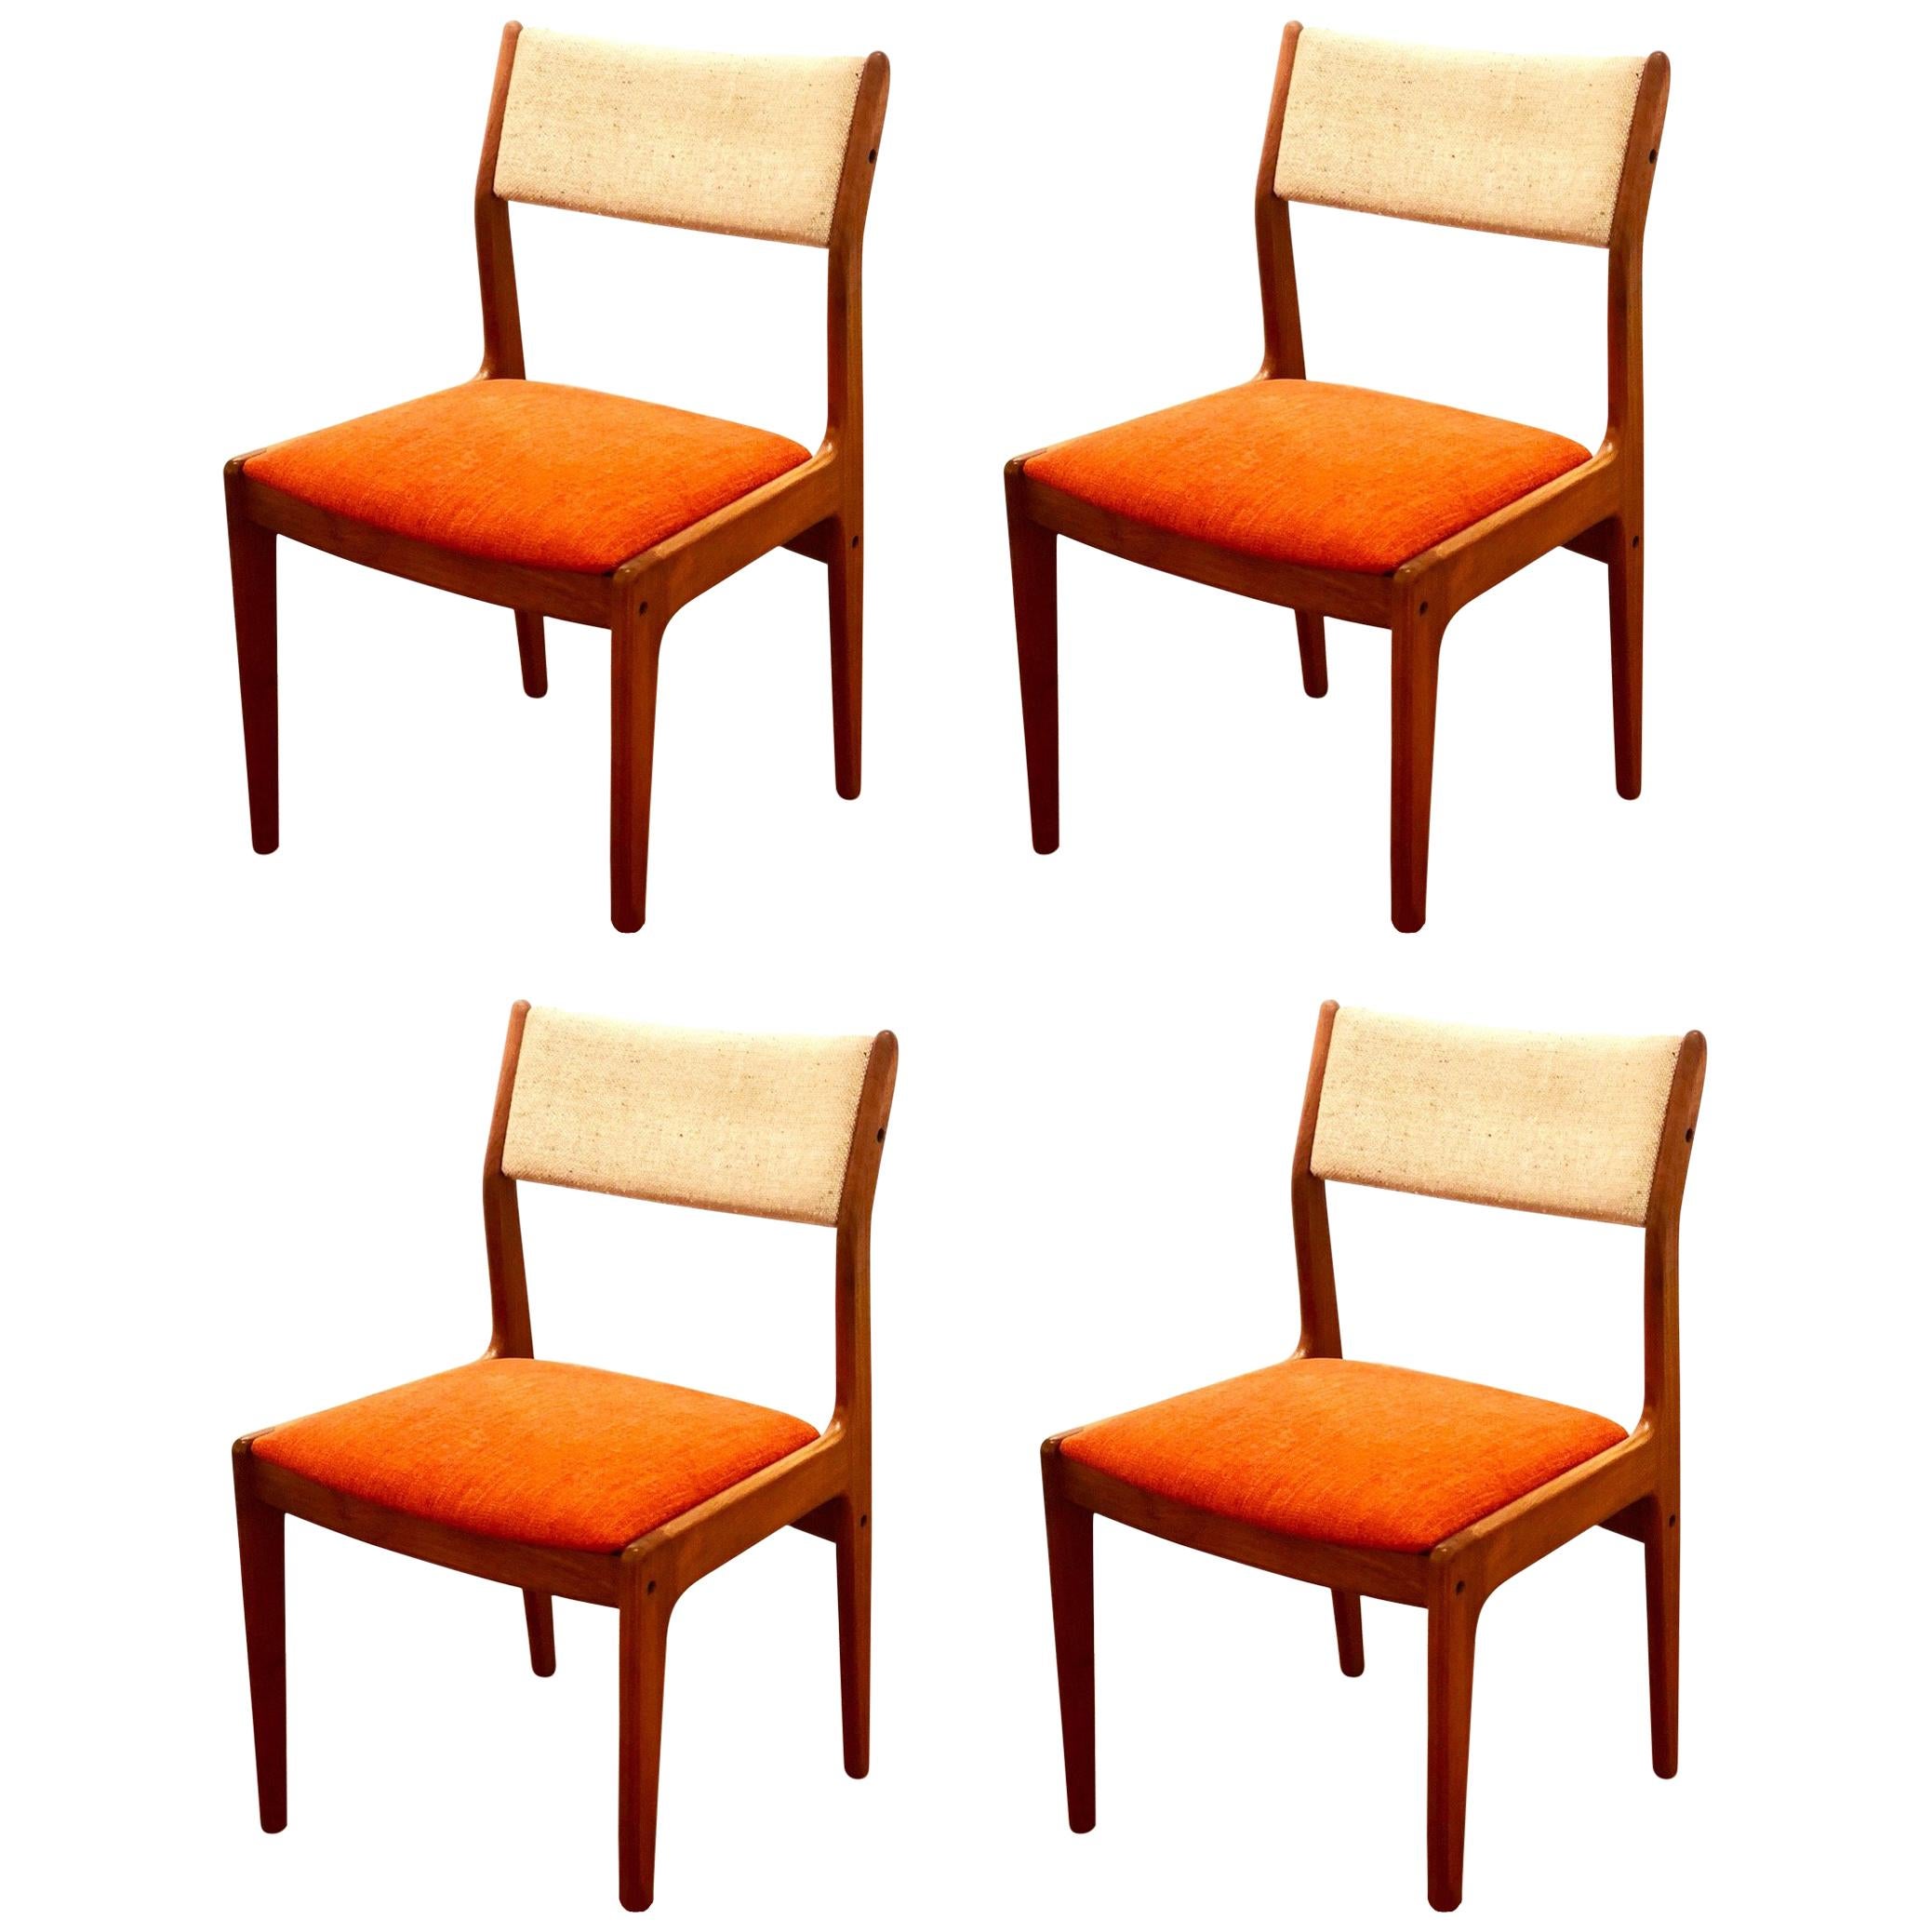 Set of Four Danish Modern Solid Teak Two-Tone Upholstered Dinning Chairs